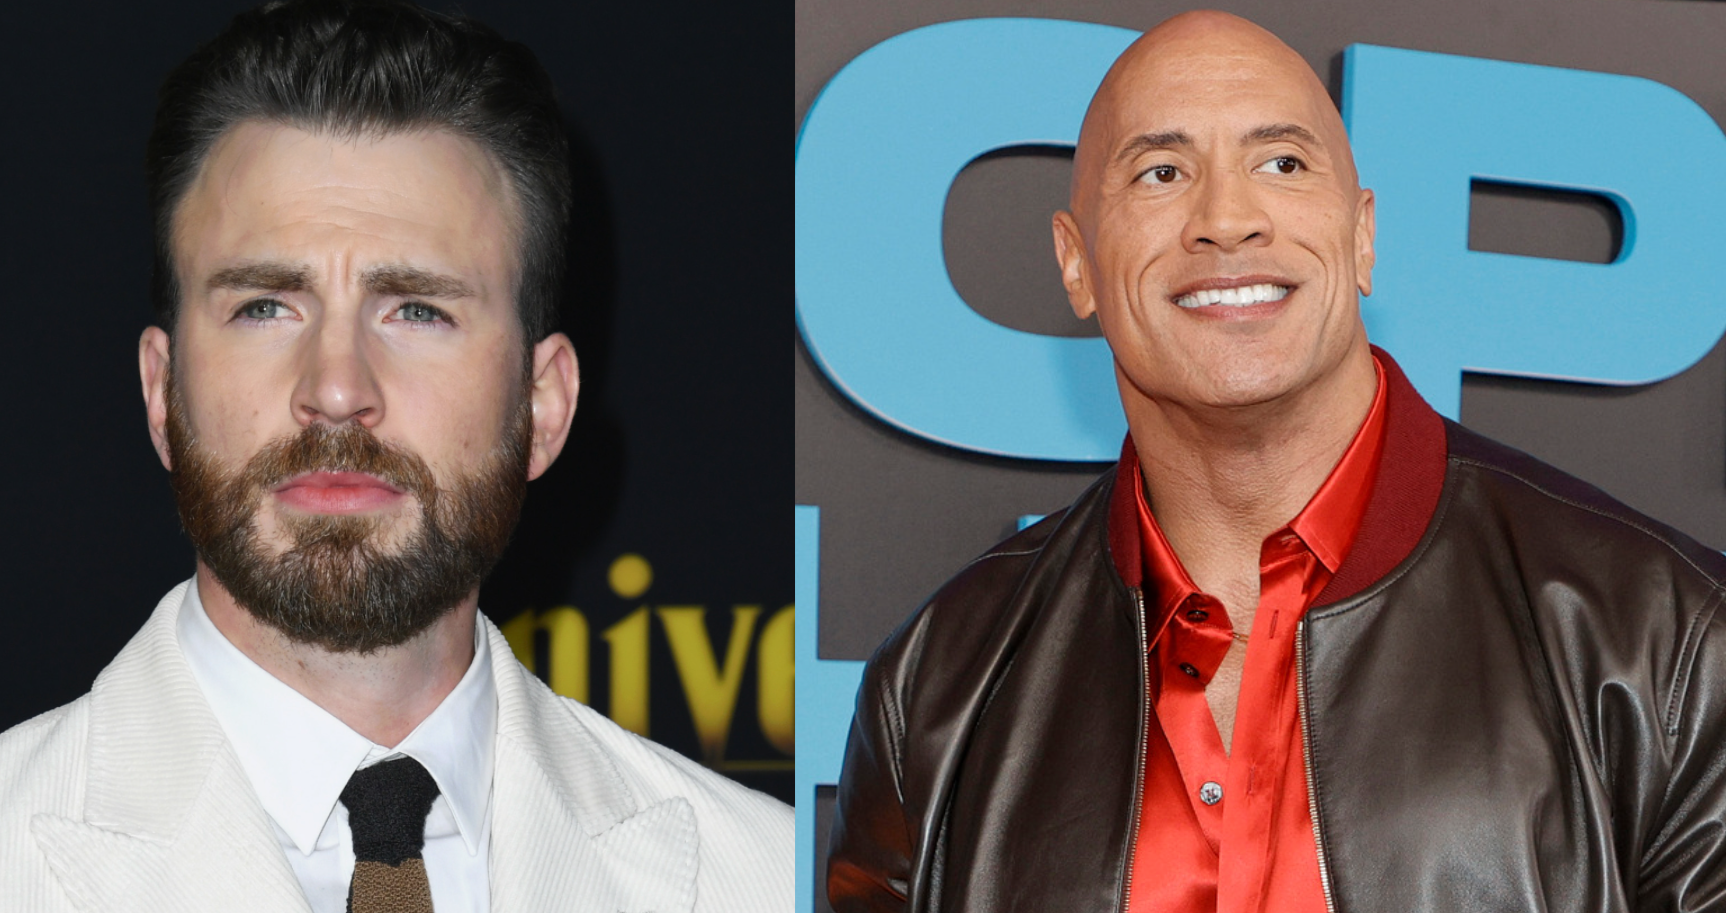 Chris Evans and Dwayne Johnson to Star in Action Comedy 'Red One